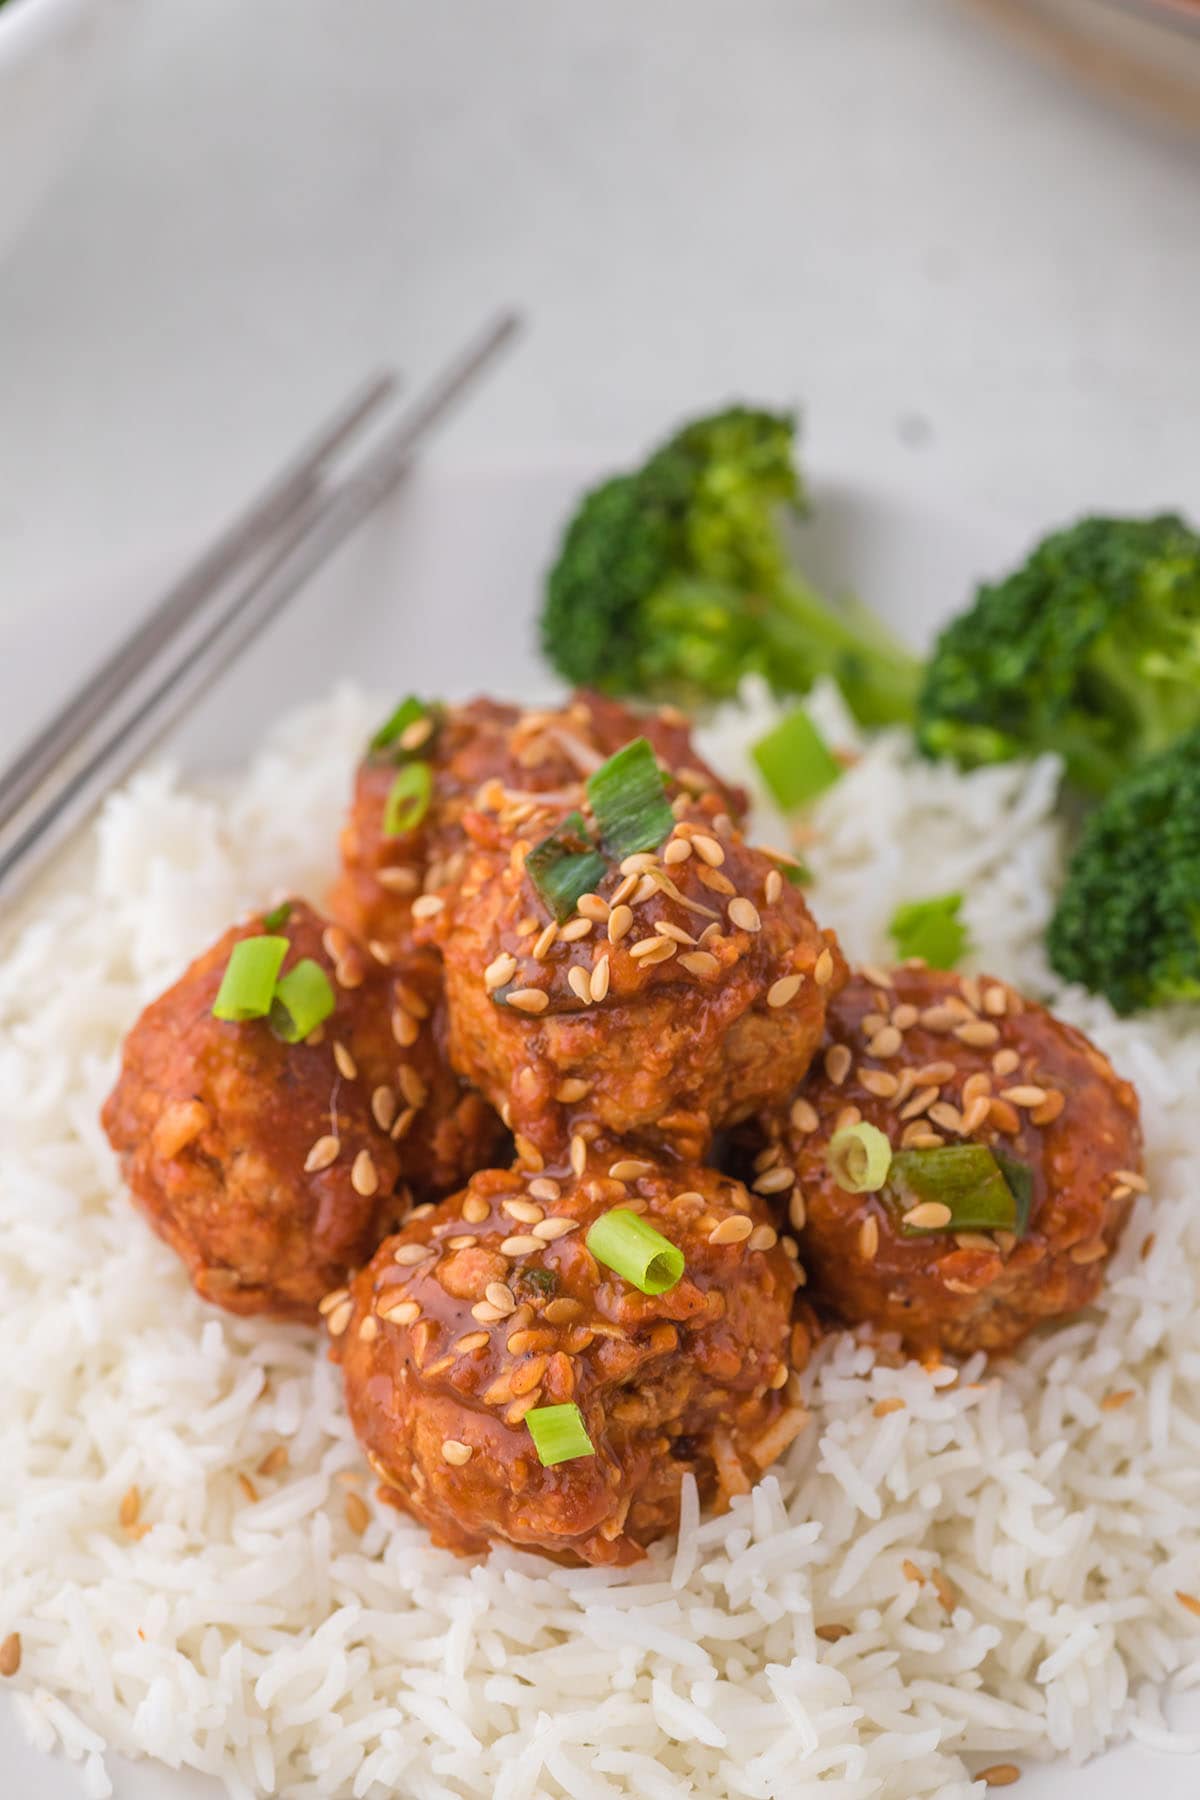 Asian Meatballs over rice with broccoli at the side.